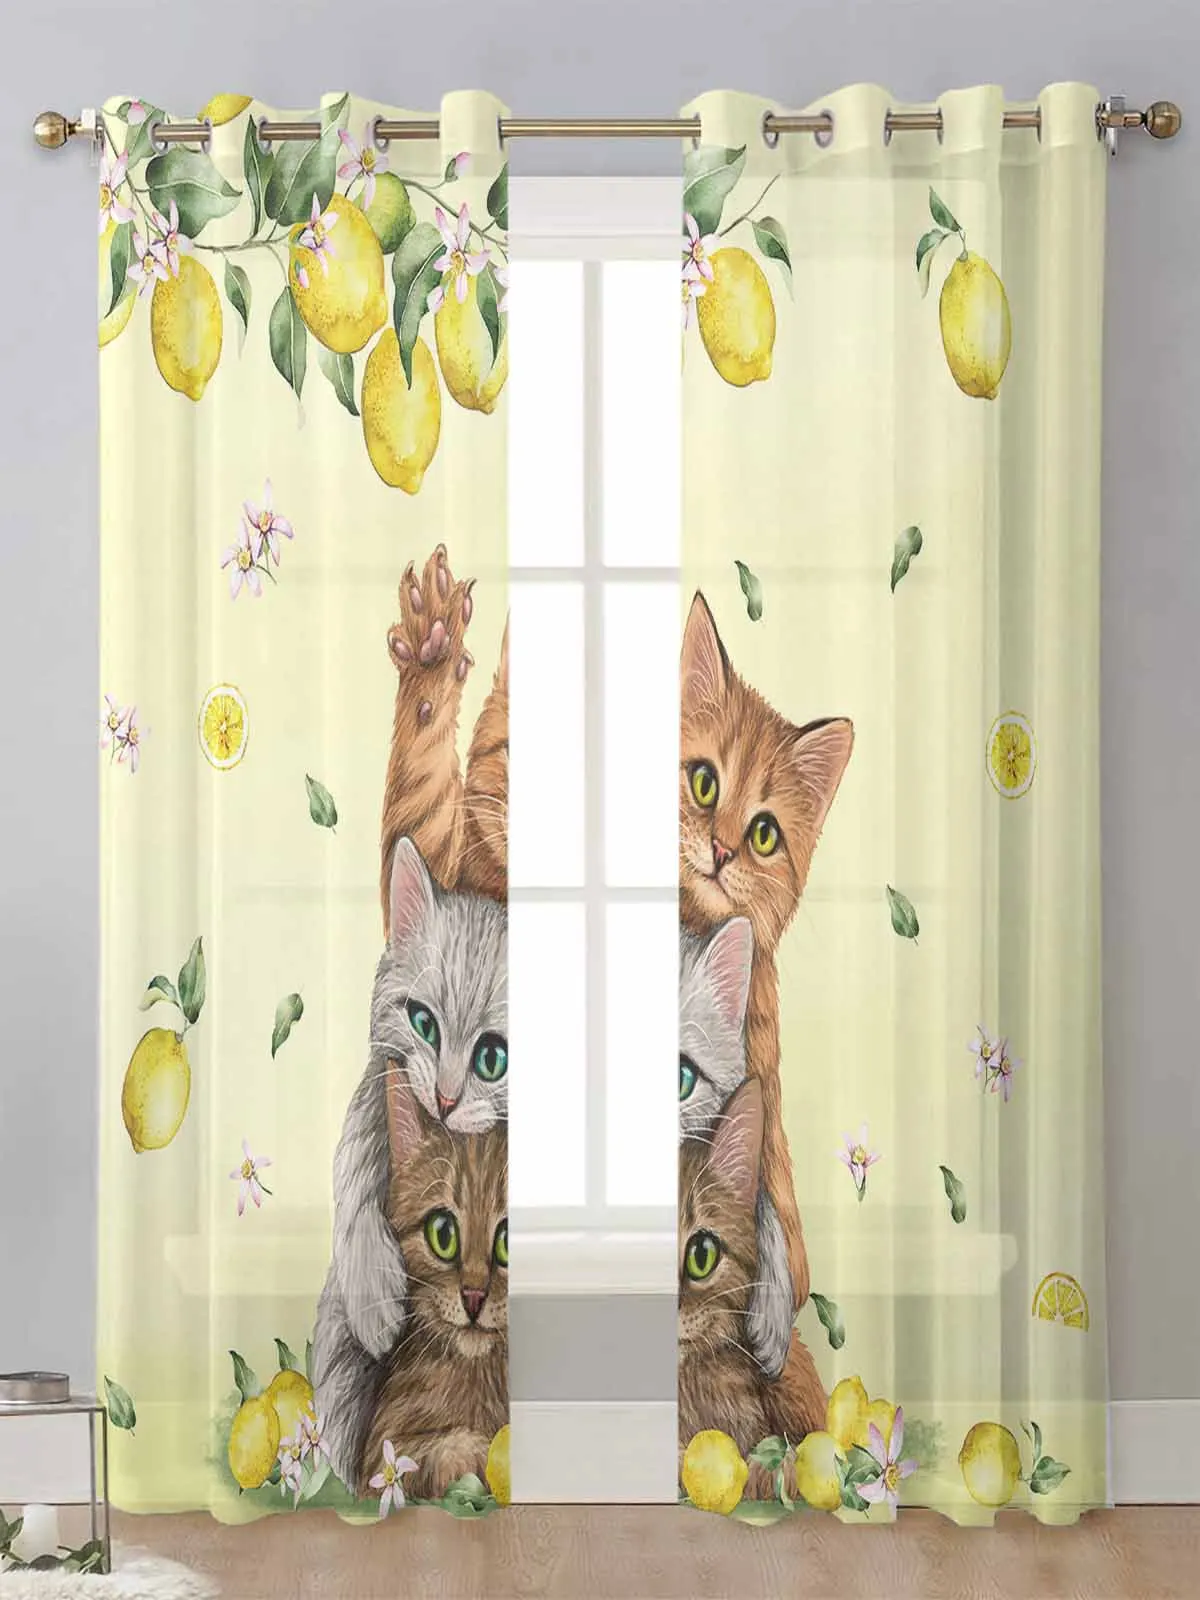 

Summer Fruit Lemon Cat Sheer Curtains For Living Room Window Transparent Voile Tulle Curtain Cortinas Drapes Home Decor